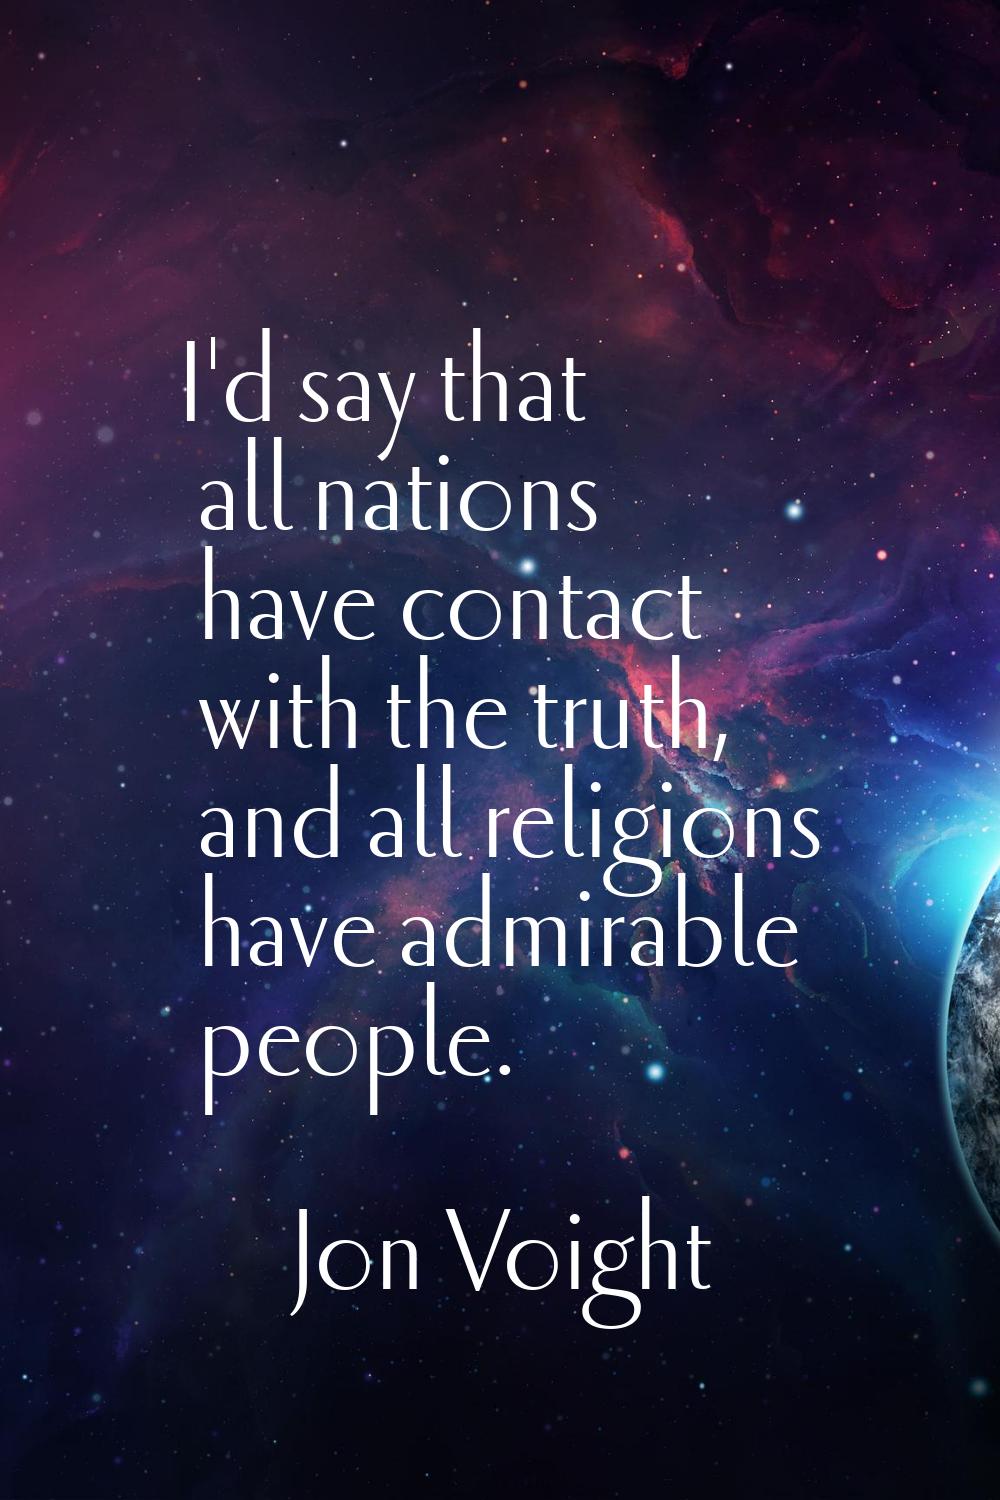 I'd say that all nations have contact with the truth, and all religions have admirable people.